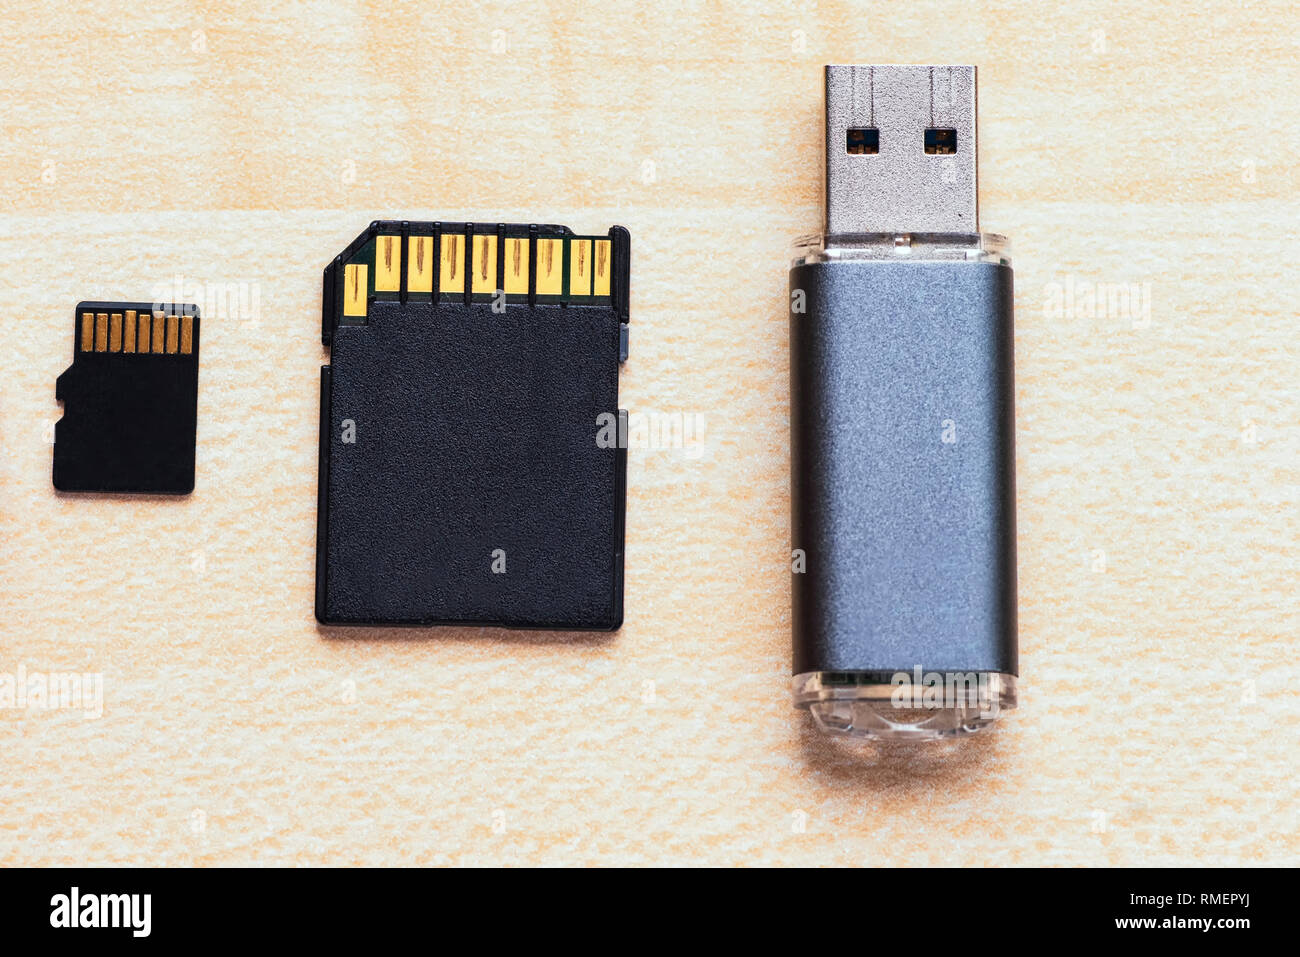 Transfer or backup data. Set of equipment for storage information .The  devices for store data flash drive, sd card and micro sd card Stock Photo -  Alamy